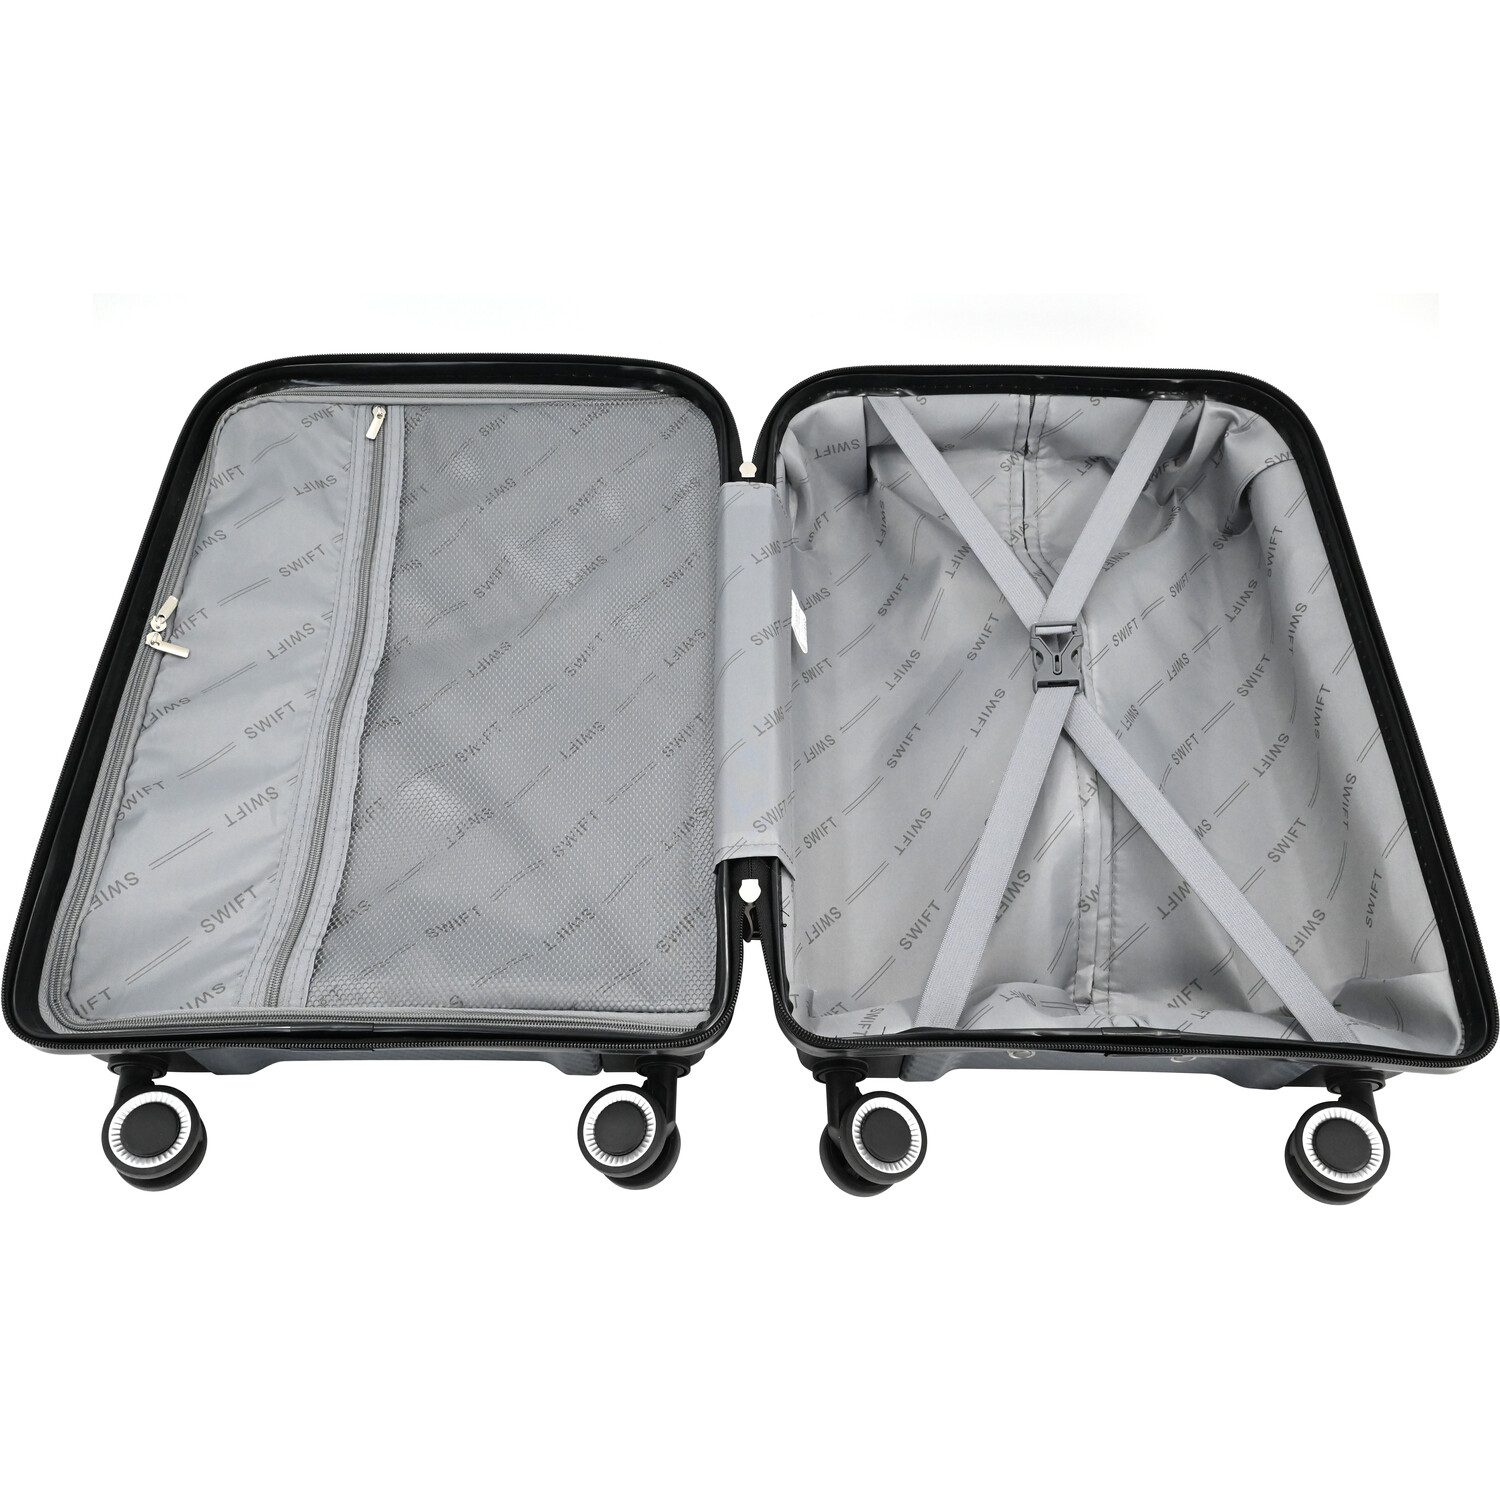 Swift Discovery Luggage Case - Grey / Cabin Case Image 5